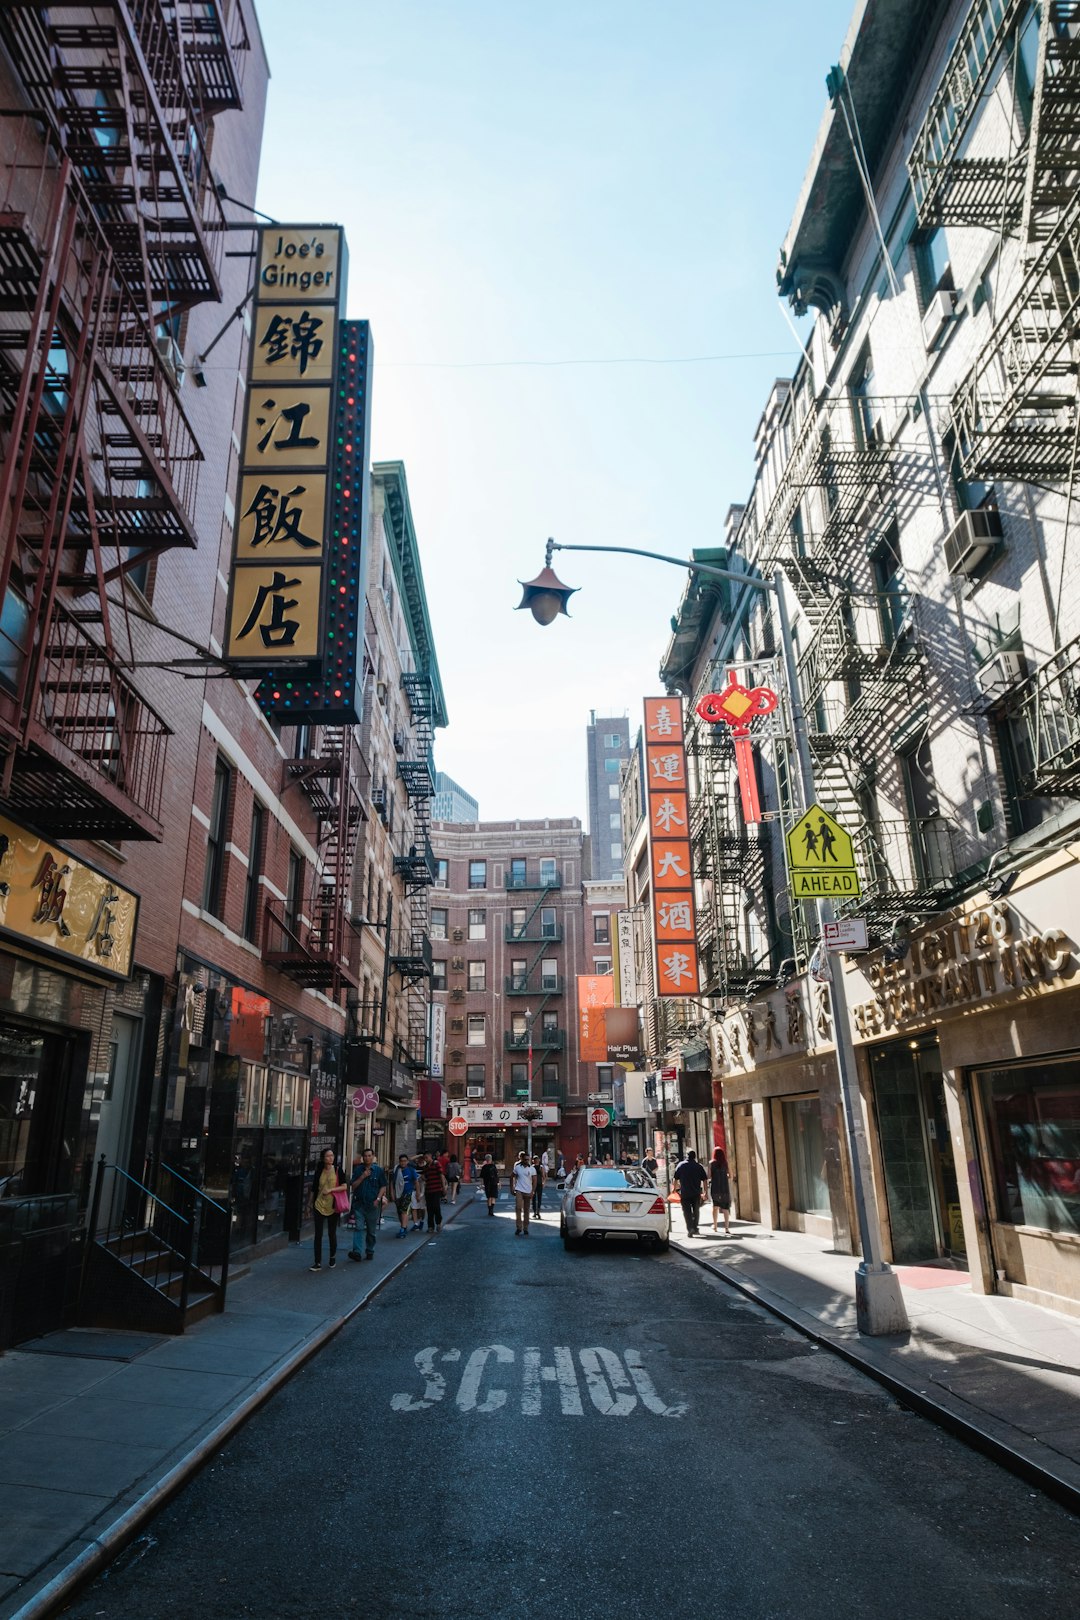 Travel Tips and Stories of Chinatown in United States